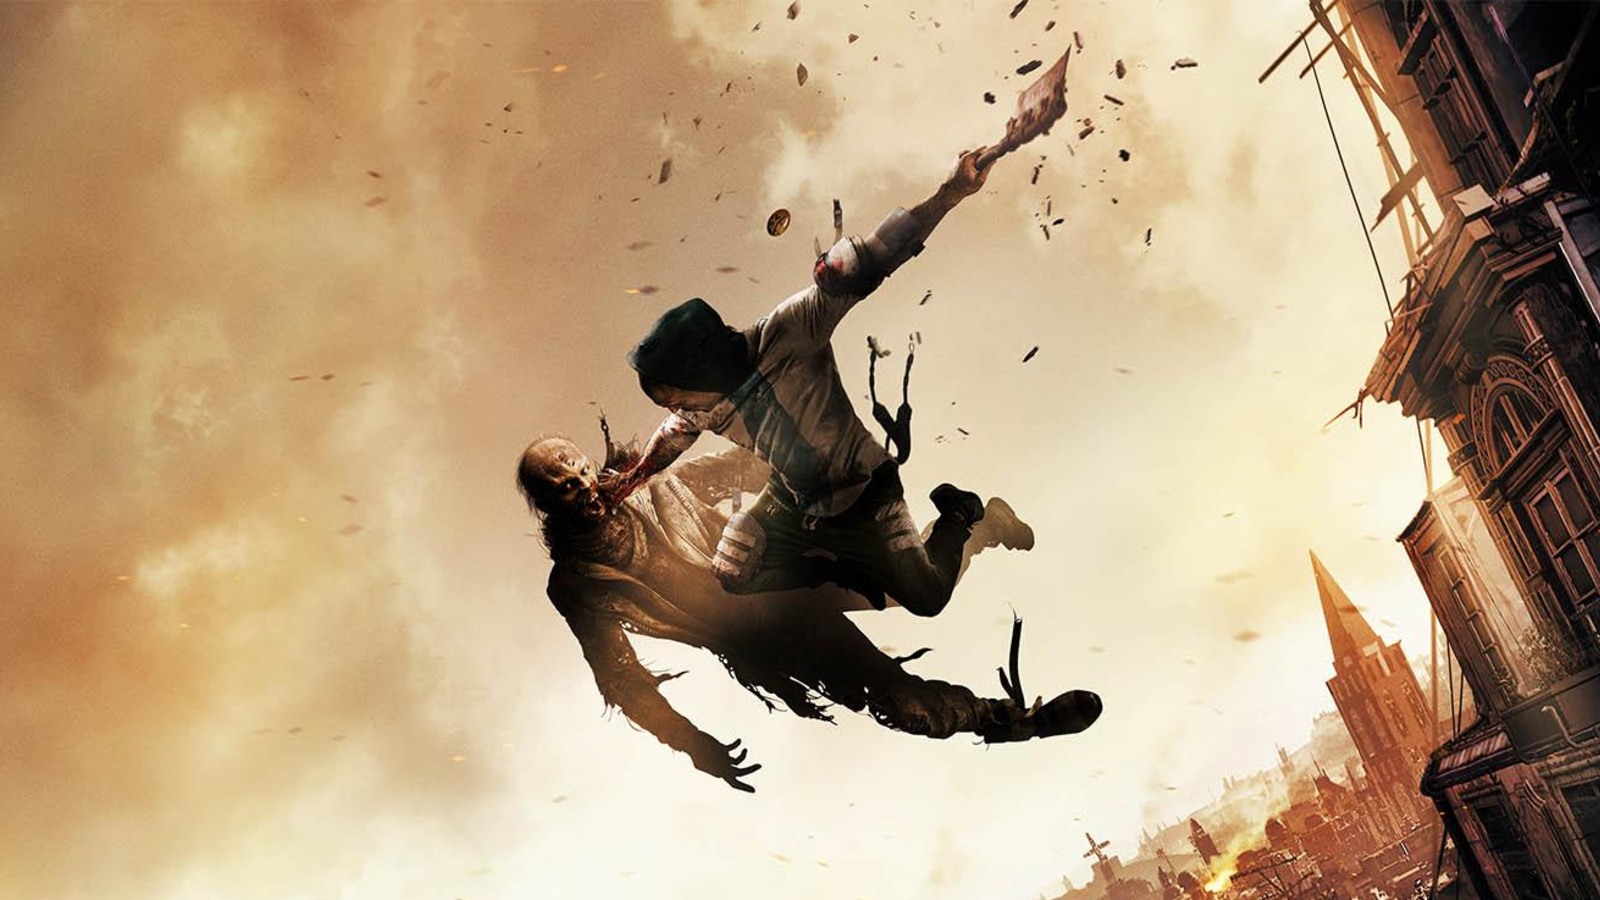 Review: 'Dying Light 2' builds on gameplay, but with so-so story